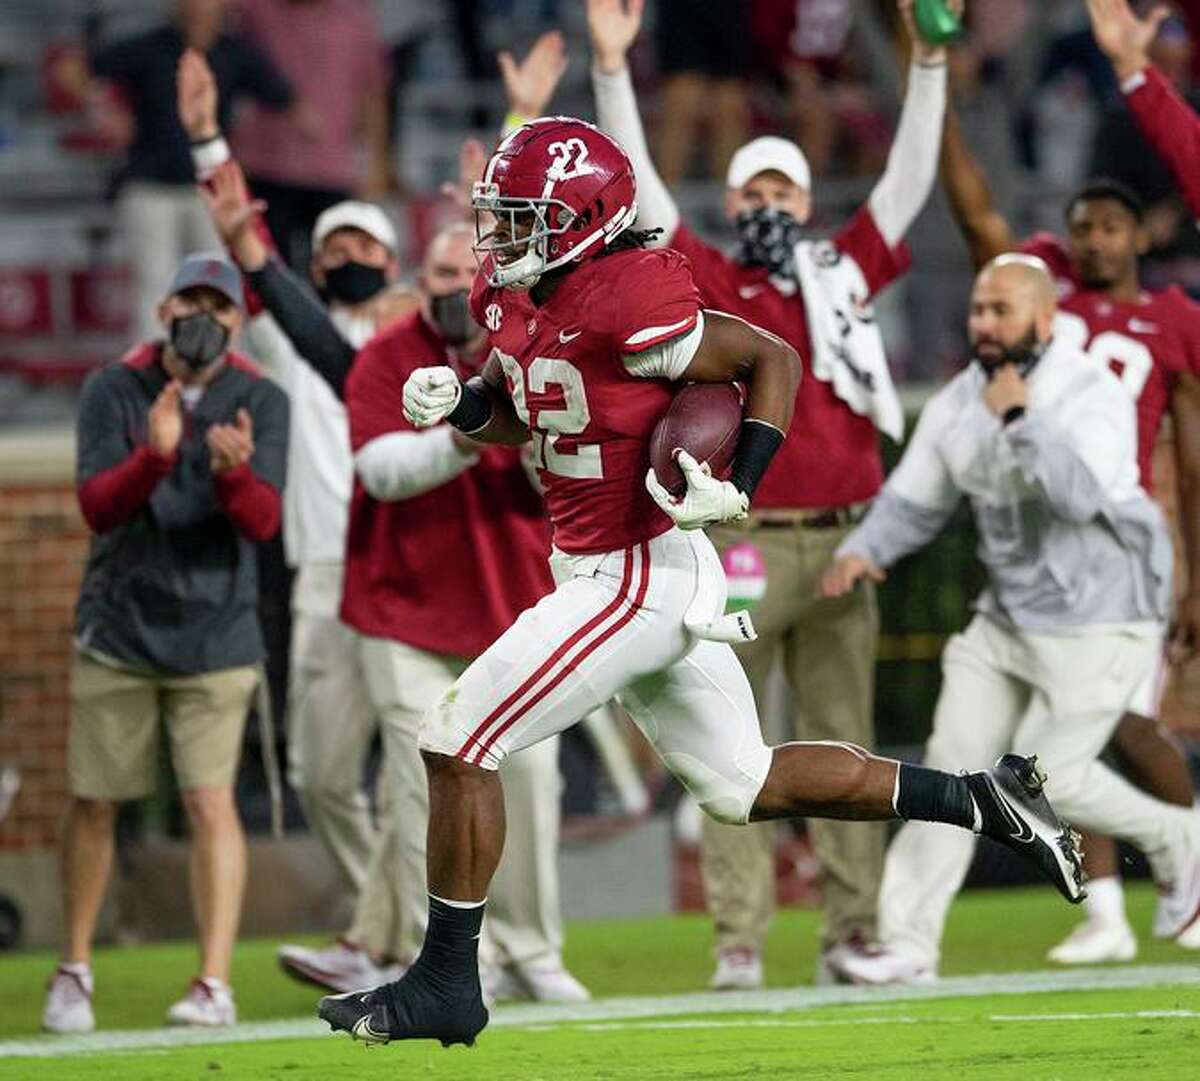 Alabama running back Najee Harris (22) scores a touchdown on a long run against Auburn during an NCAA college football game Saturday, Nov. 28, 2020, in Tuscaloosa, Ala. (Mickey Welsh/The Montgomery Advertiser via AP)